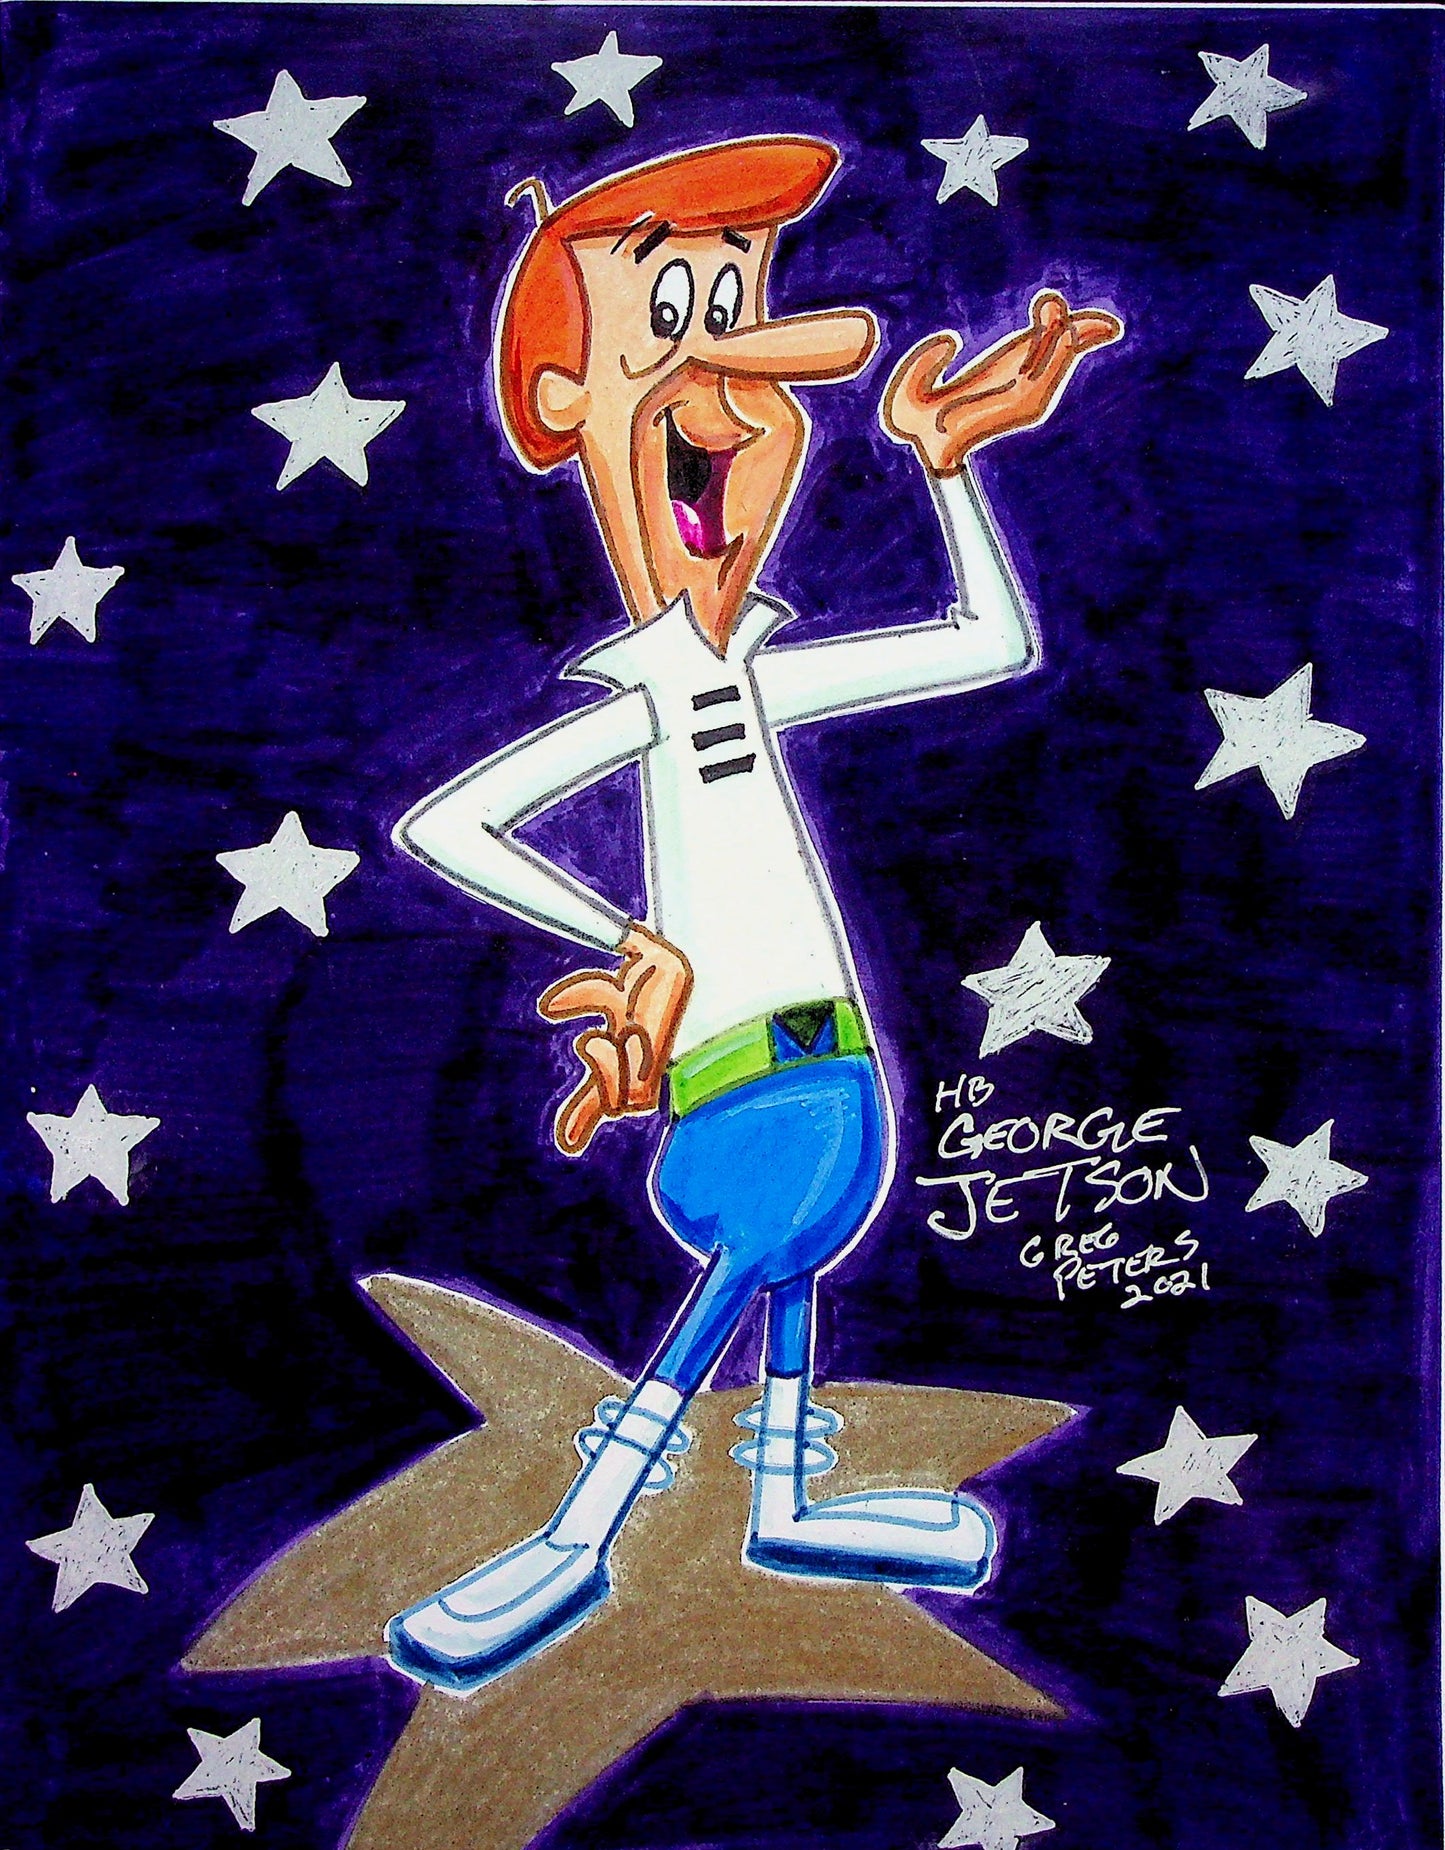 Greg Peters Signed GEORGE JETSON Hand Painted Animation Art